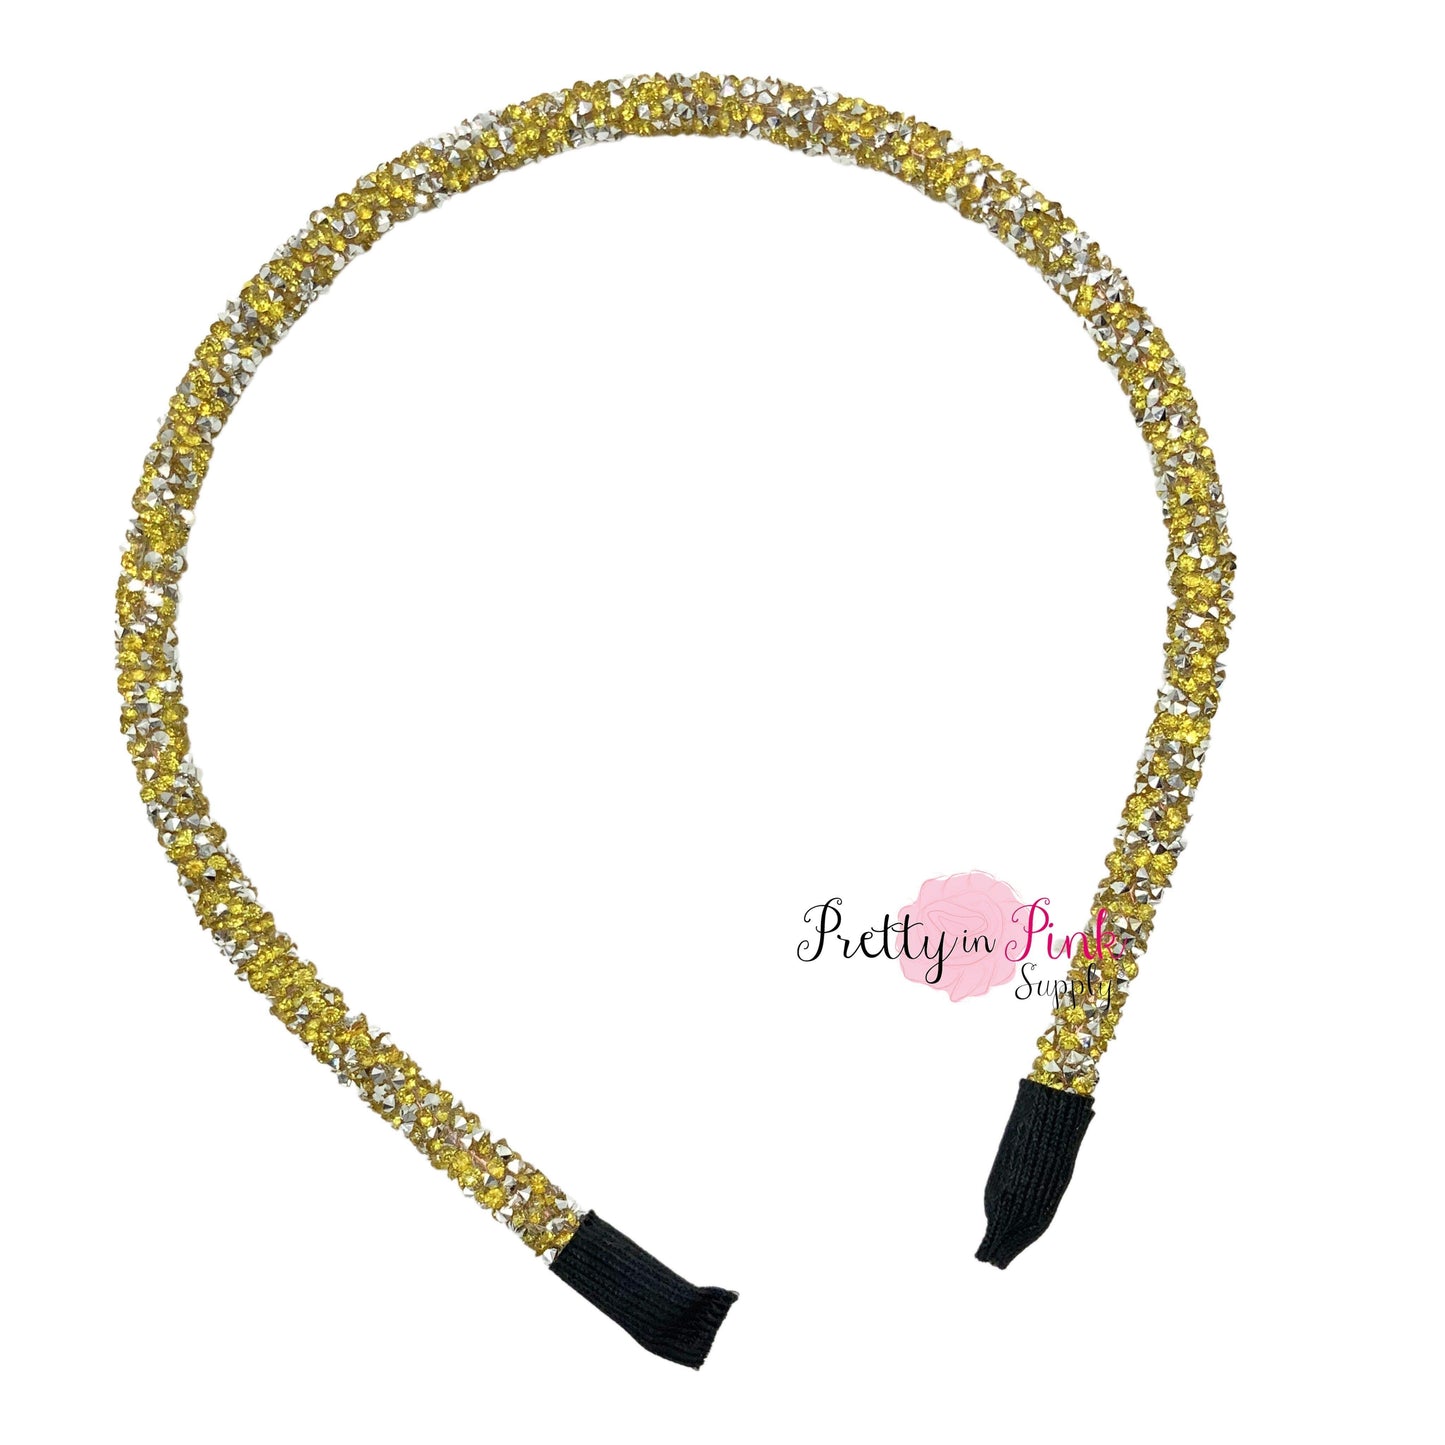 Bright Gold/Silver Gem | Chunky Iridescent Lined Headbands - Pretty in Pink Supply